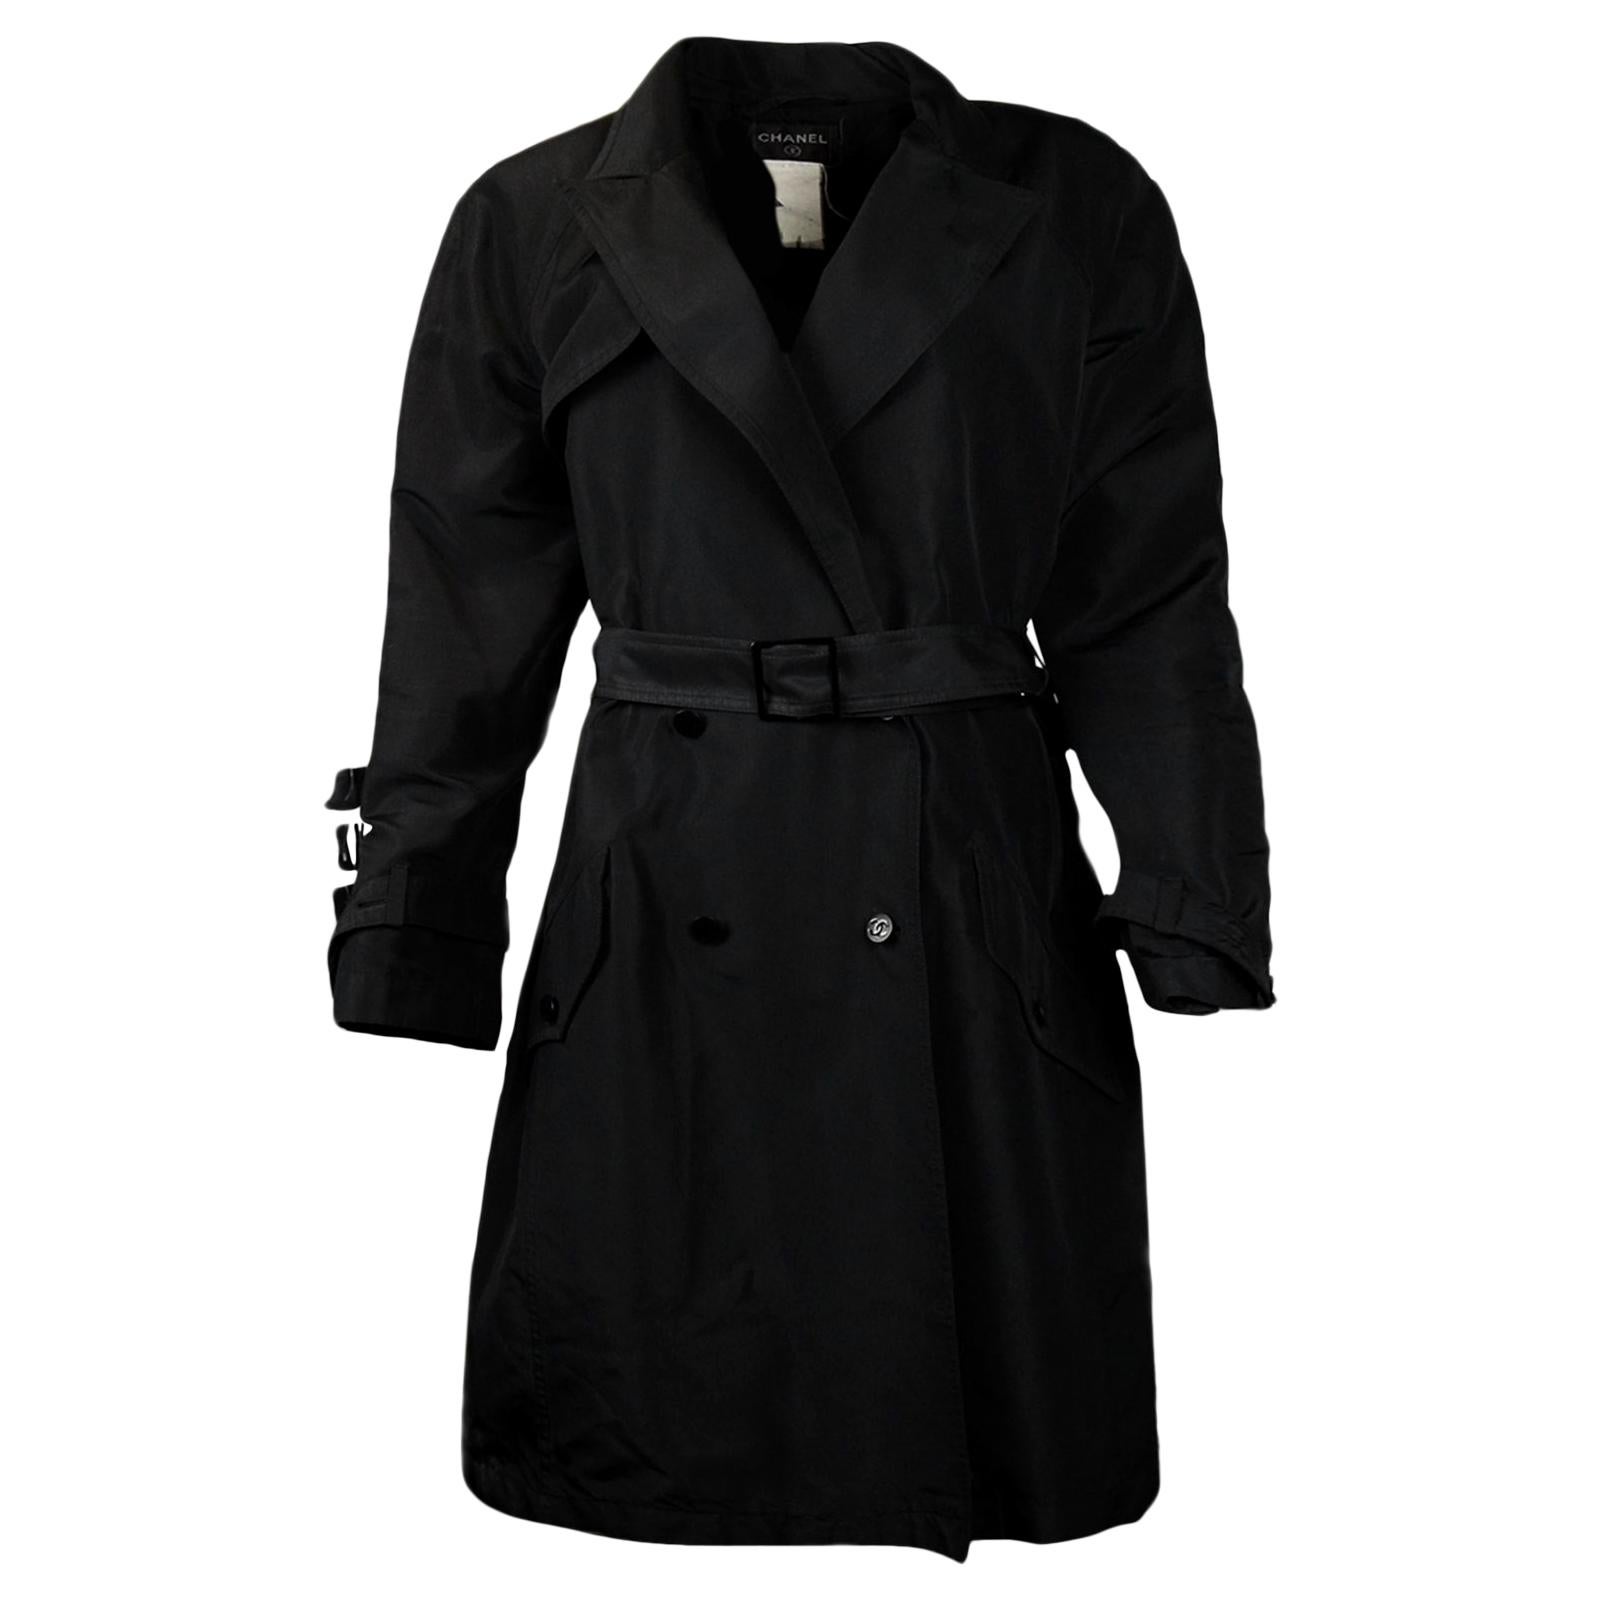 Chanel Black Trench Coat with CC Buttons & Belt sz L